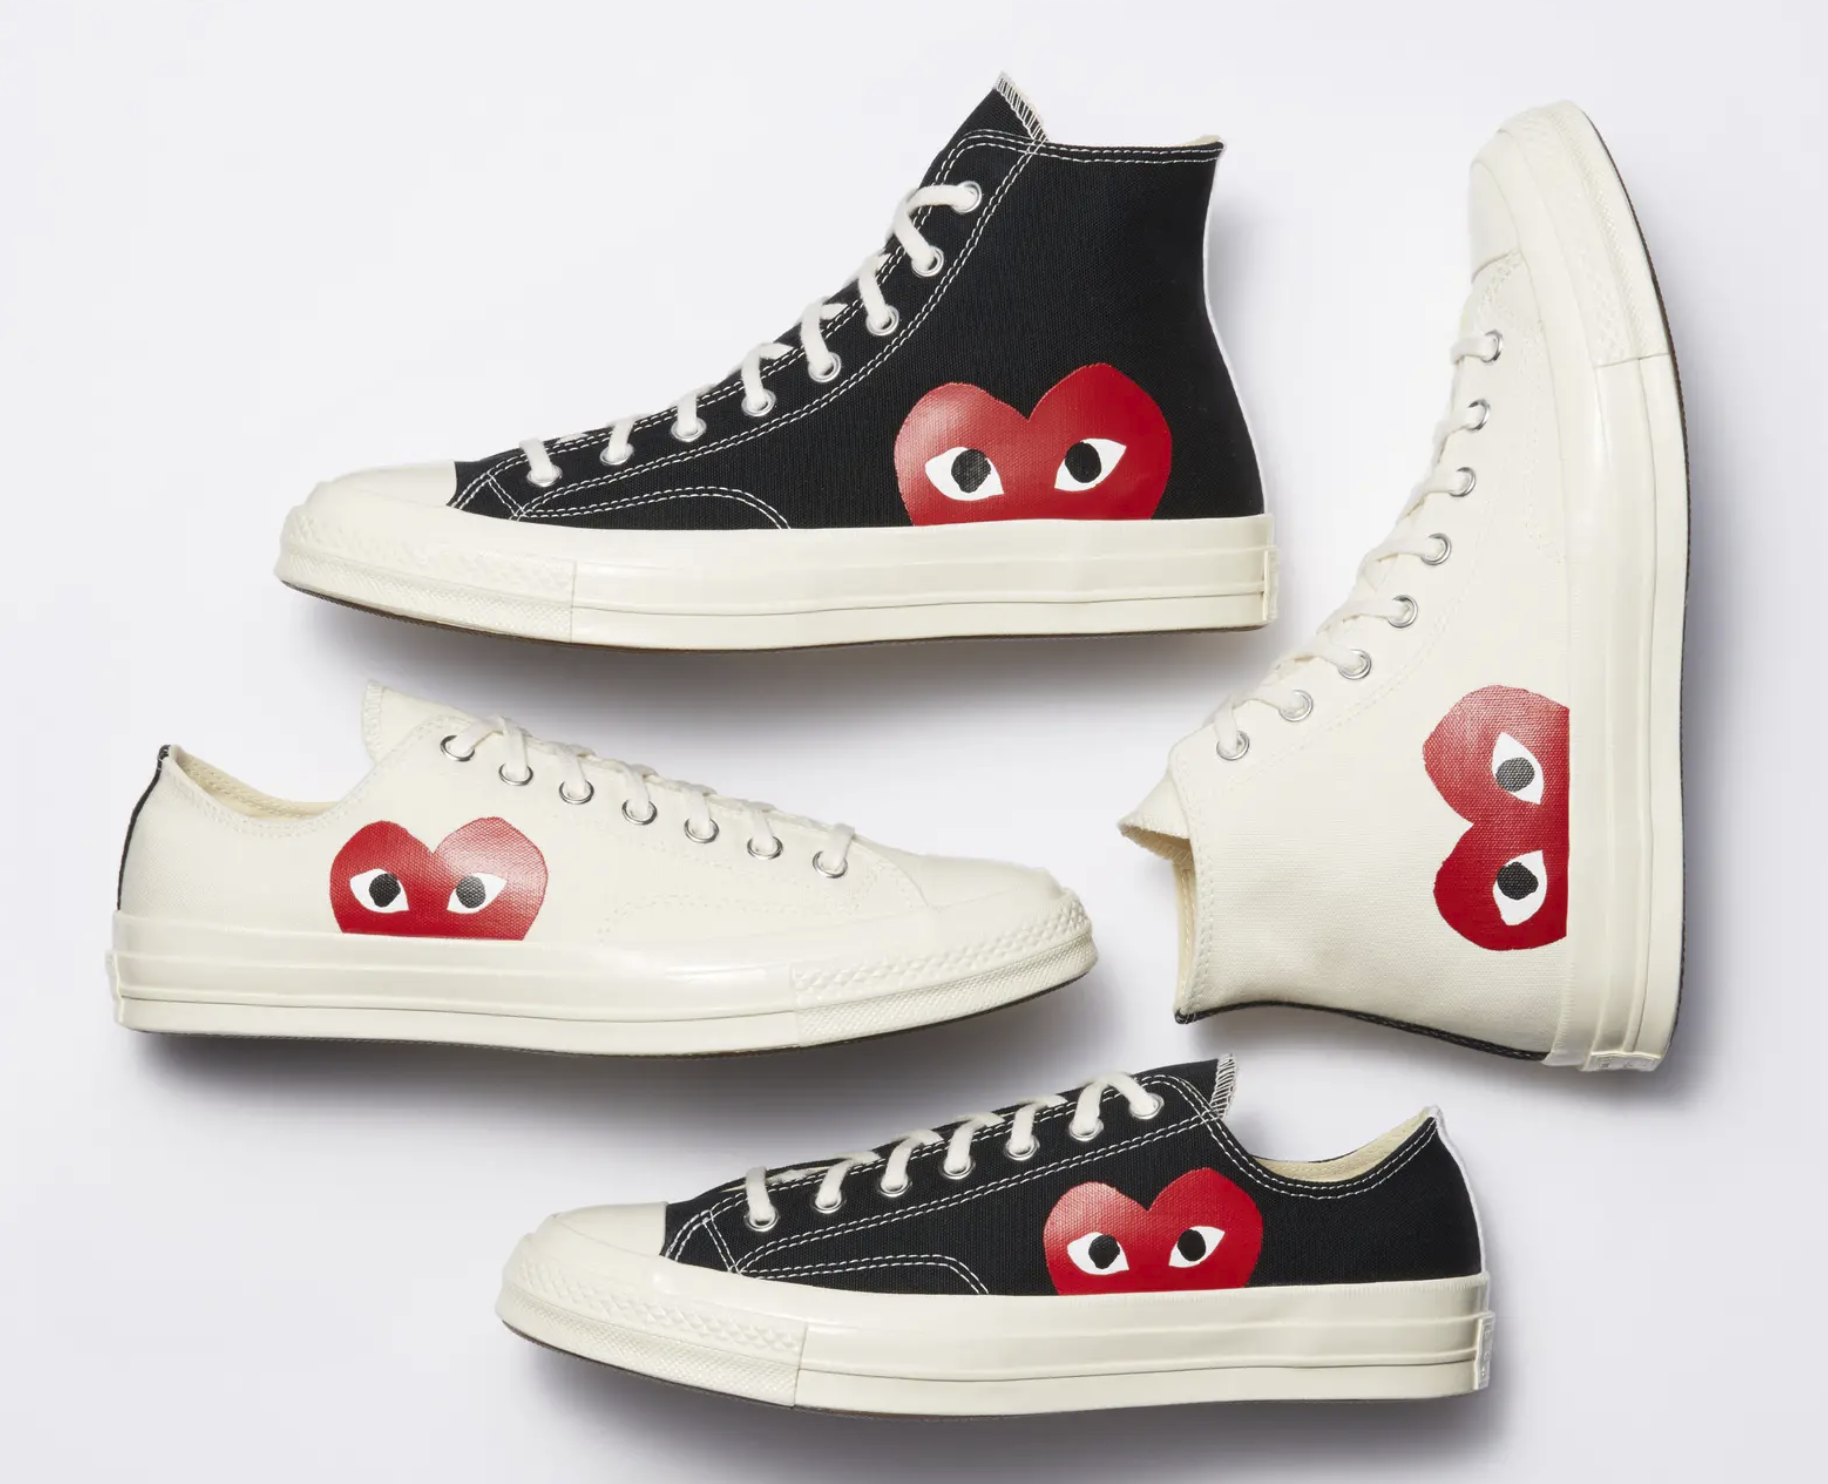 four sneakers laying beside each other. Two are white with a red heart design with eyes drawn on it (one low-top and one high-top). The other two are the black versions.